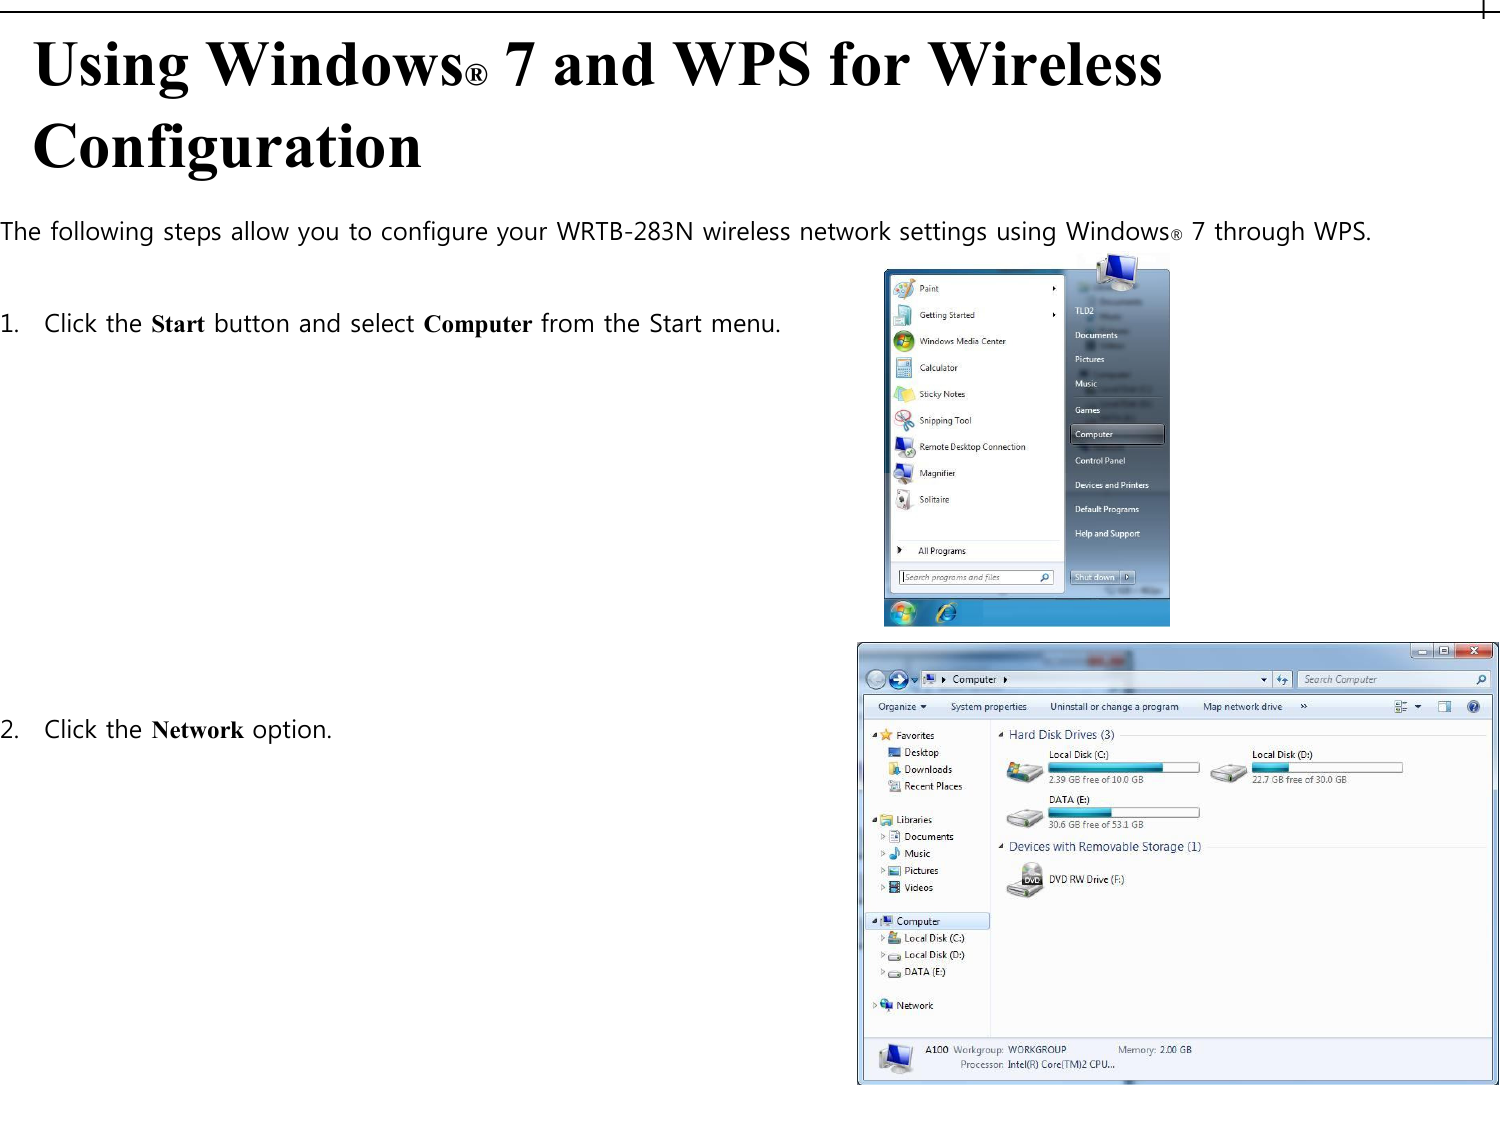   Using Windows® 7 and WPS for Wireless Configuration  The following steps allow you to configure your WRTB-283N wireless network settings using Windows® 7 through WPS.   1.    Click the Start button and select Computer from the Start menu.                 2.    Click the Network option.                      l 